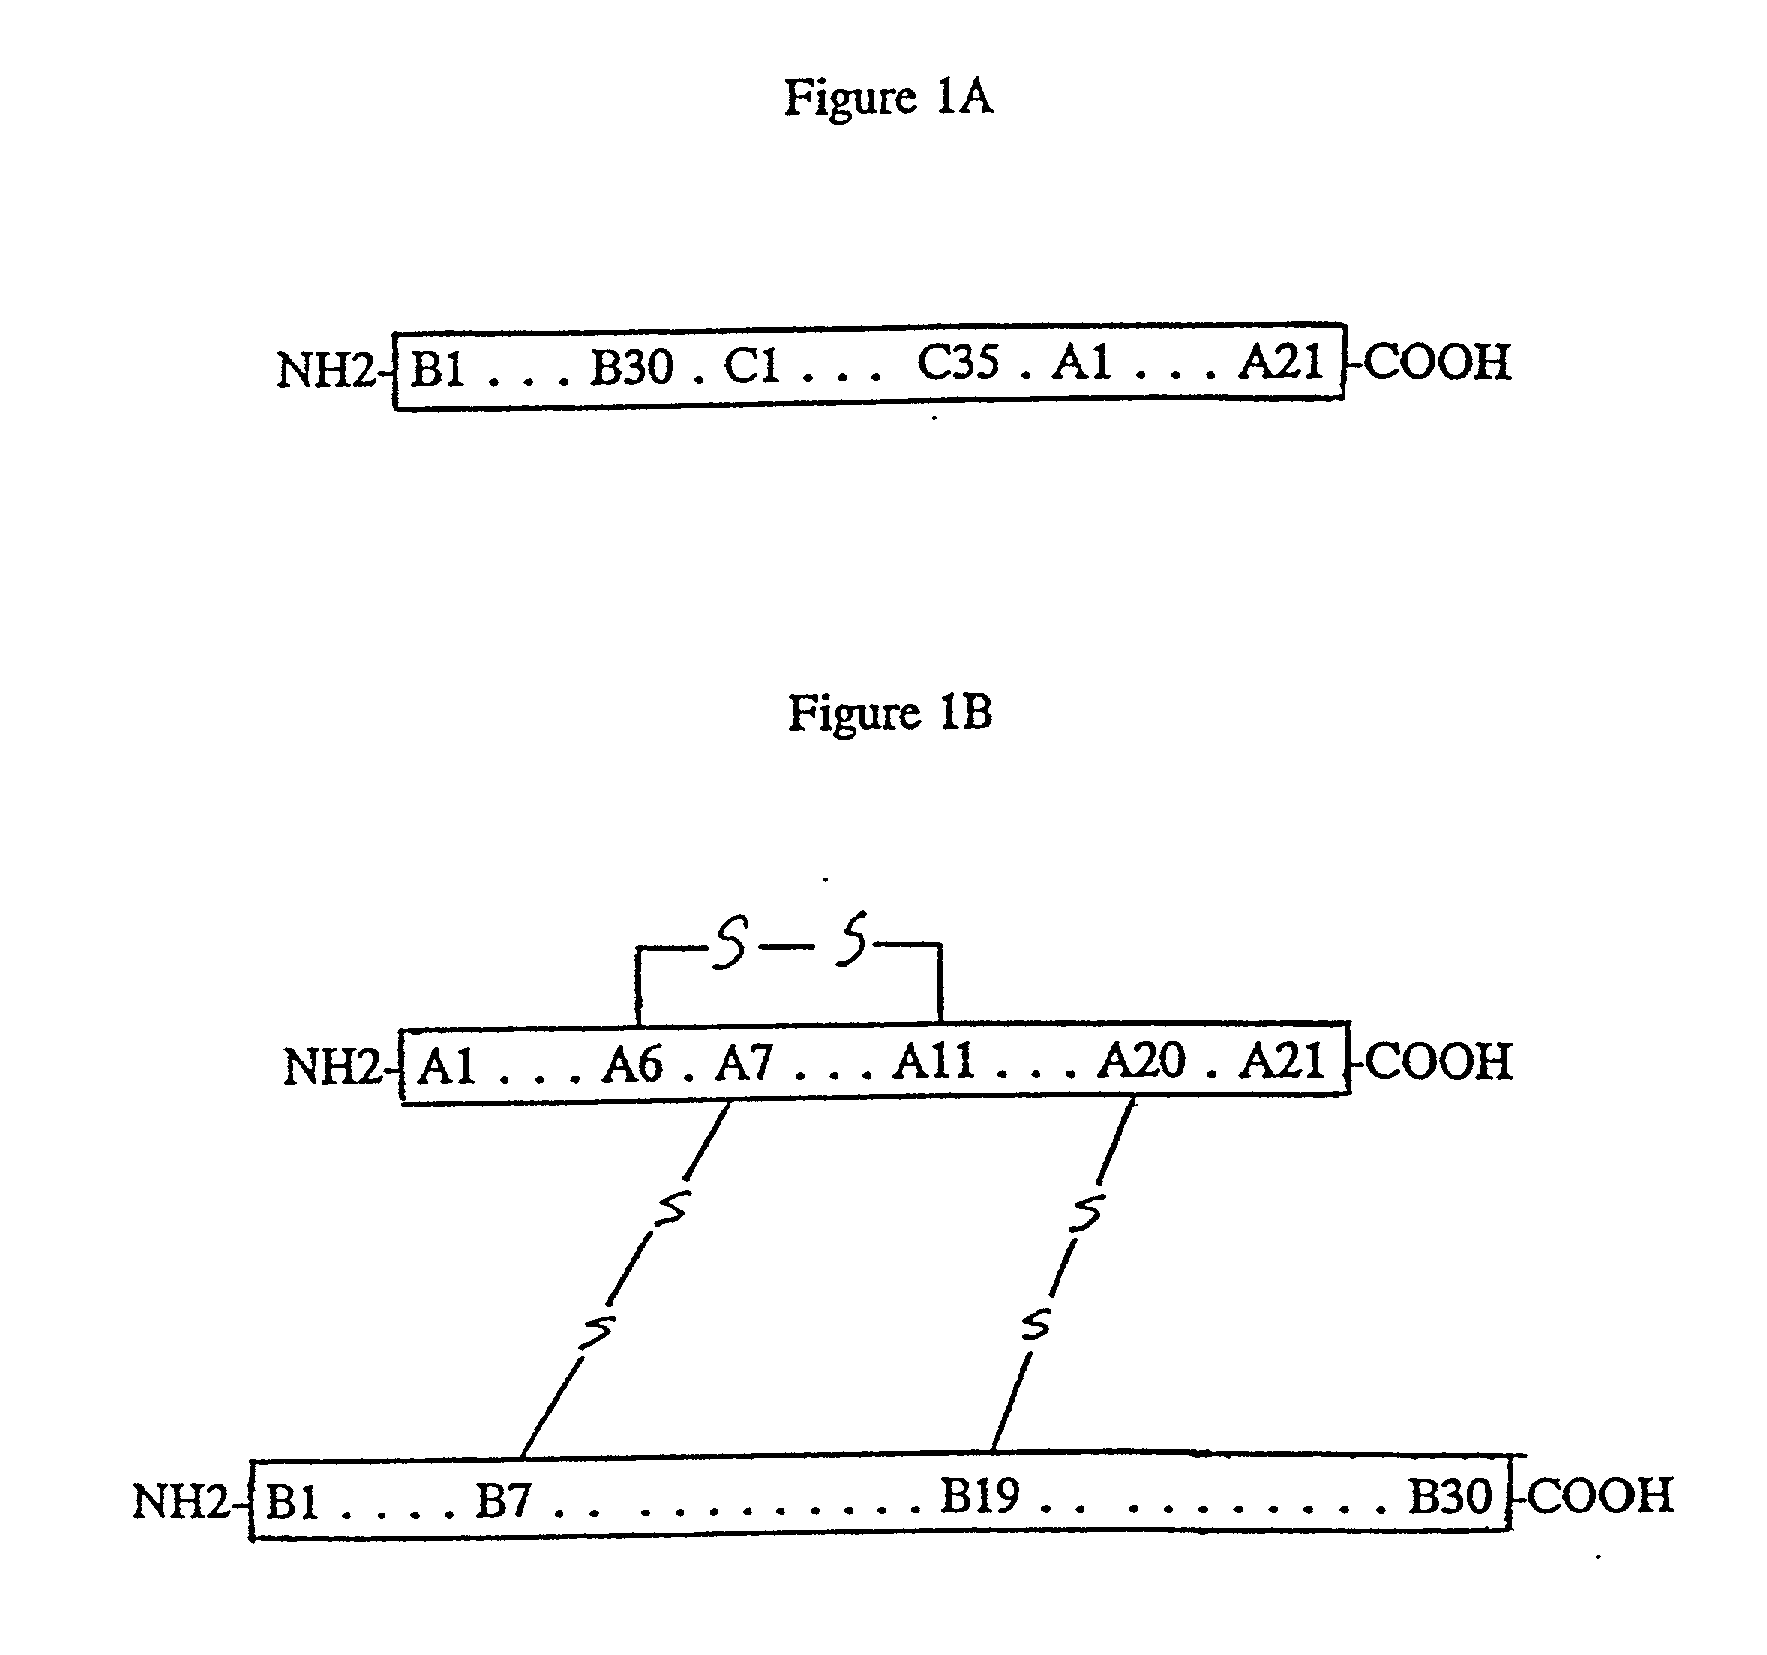 Chimeric protein containing an intramolecular chaperone-like sequence